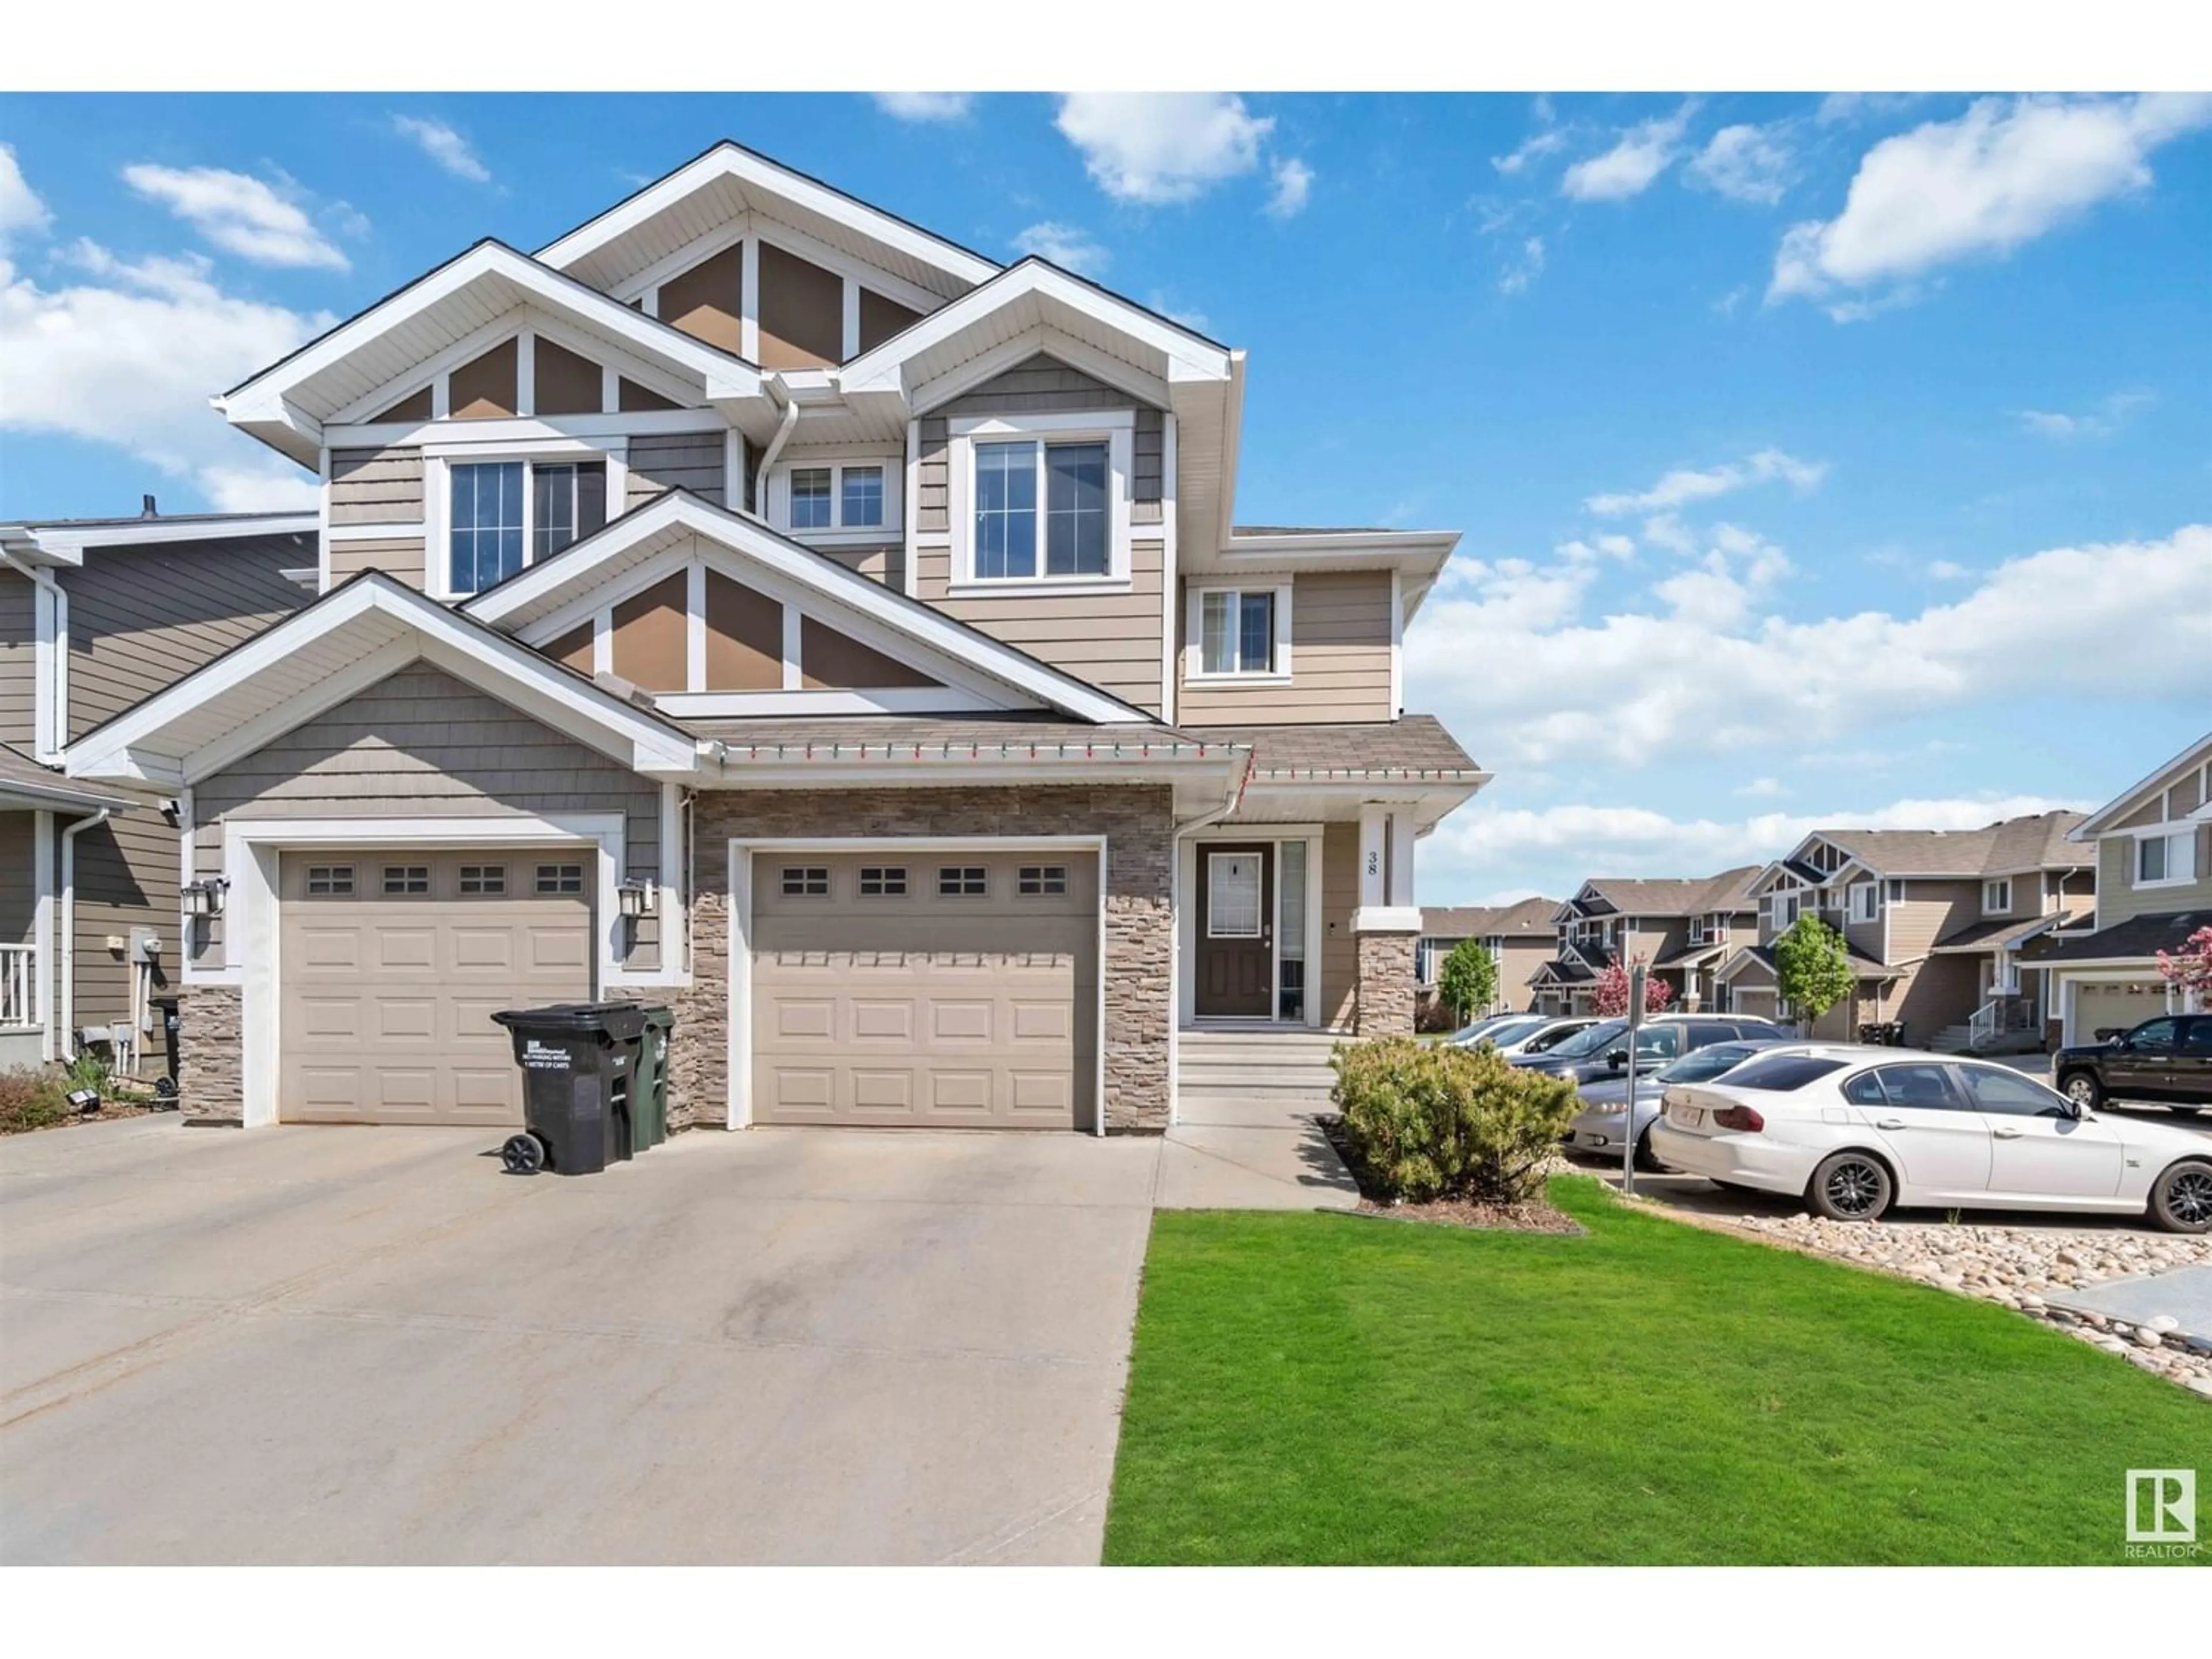 A pic from exterior of the house or condo for #38 219 CHARLOTTE WY, Sherwood Park Alberta T8H0T3